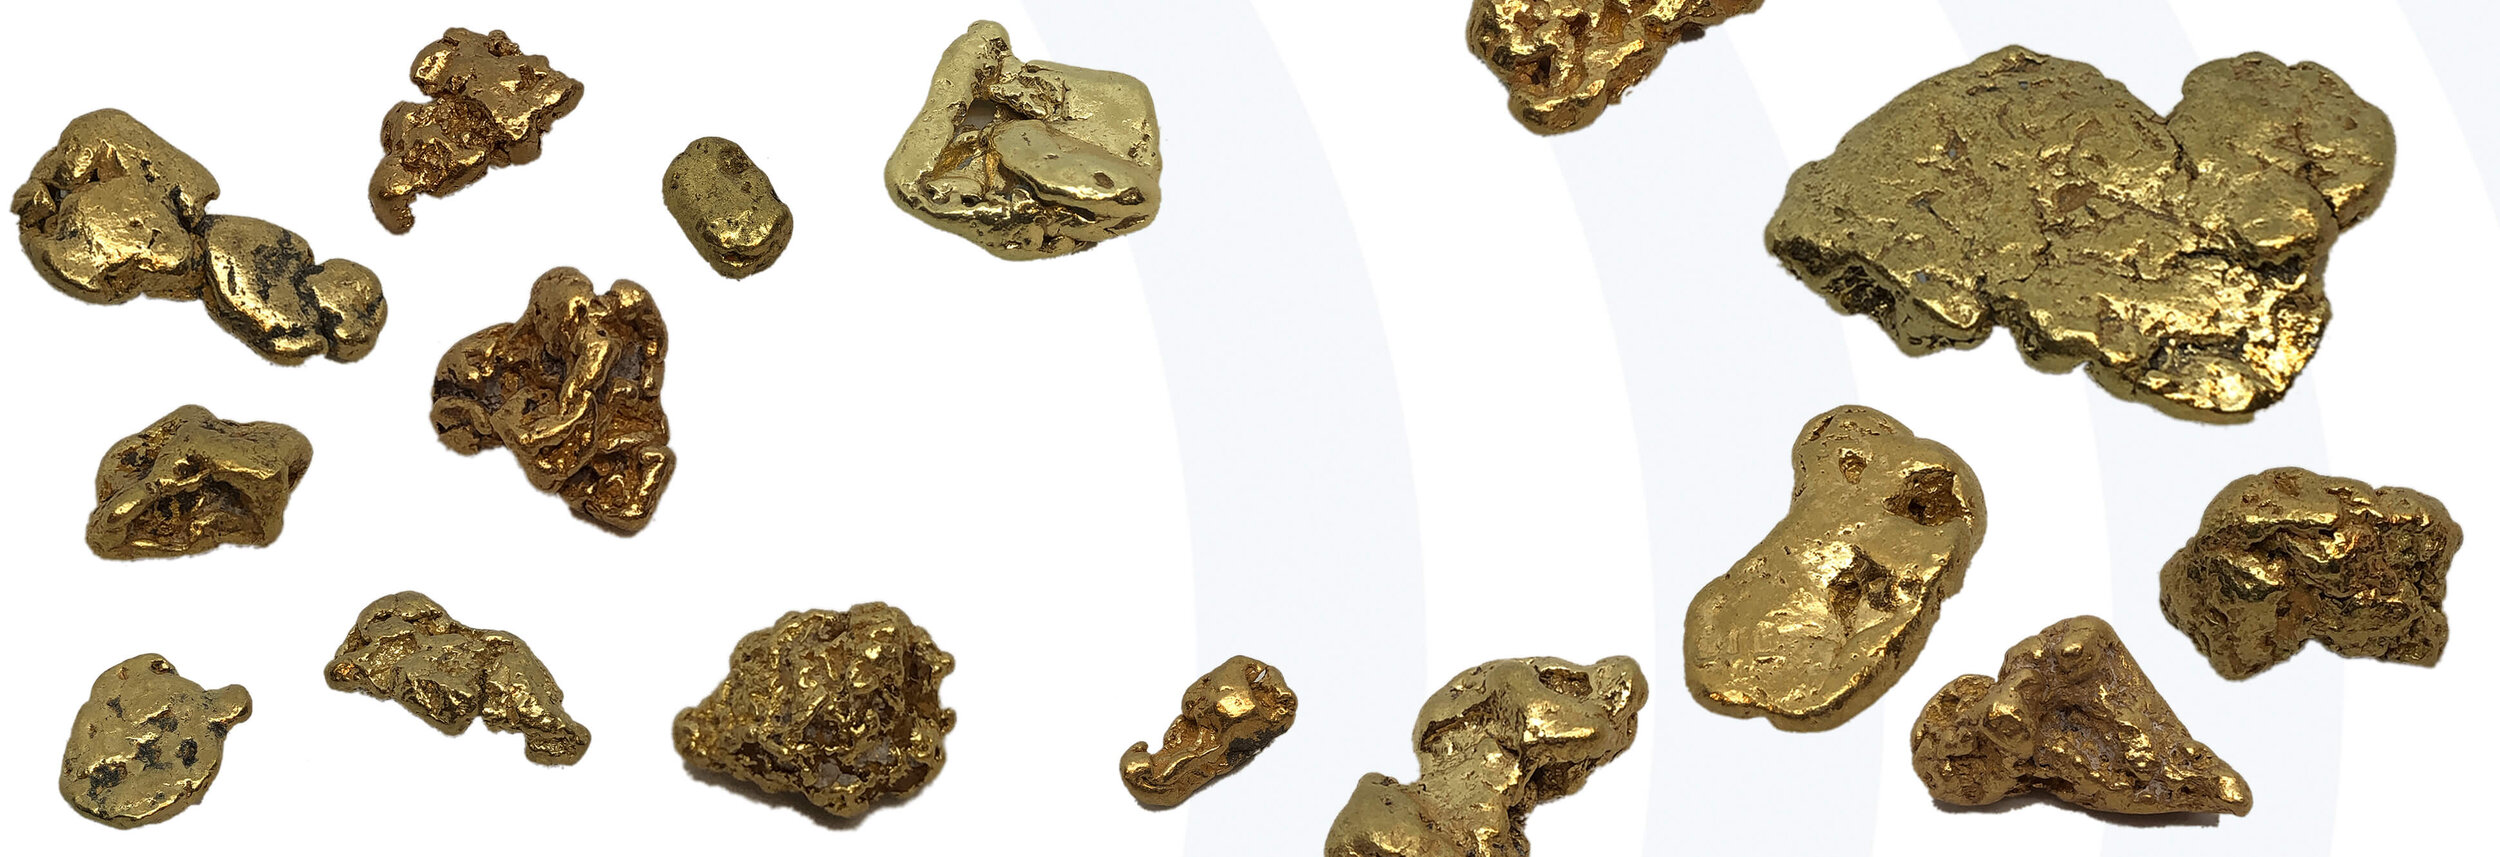 The Best Gold Paydirt on Earth™-Arizona Gold Nuggets, Gold Flakes